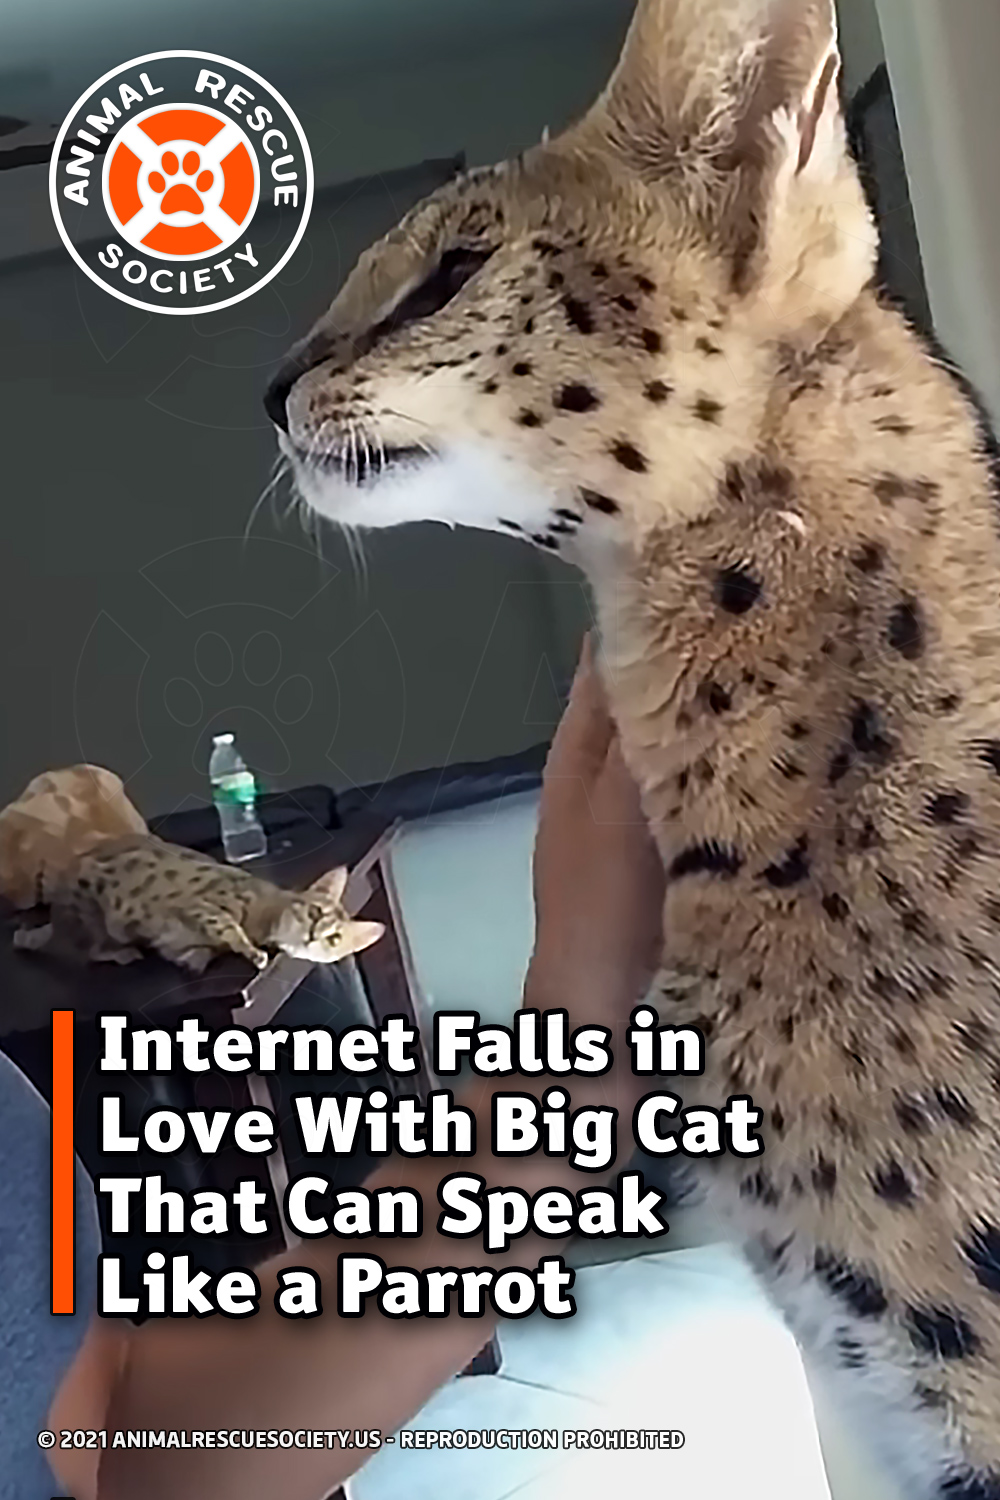 Internet Falls in Love With Big Cat That Can Speak Like a Parrot